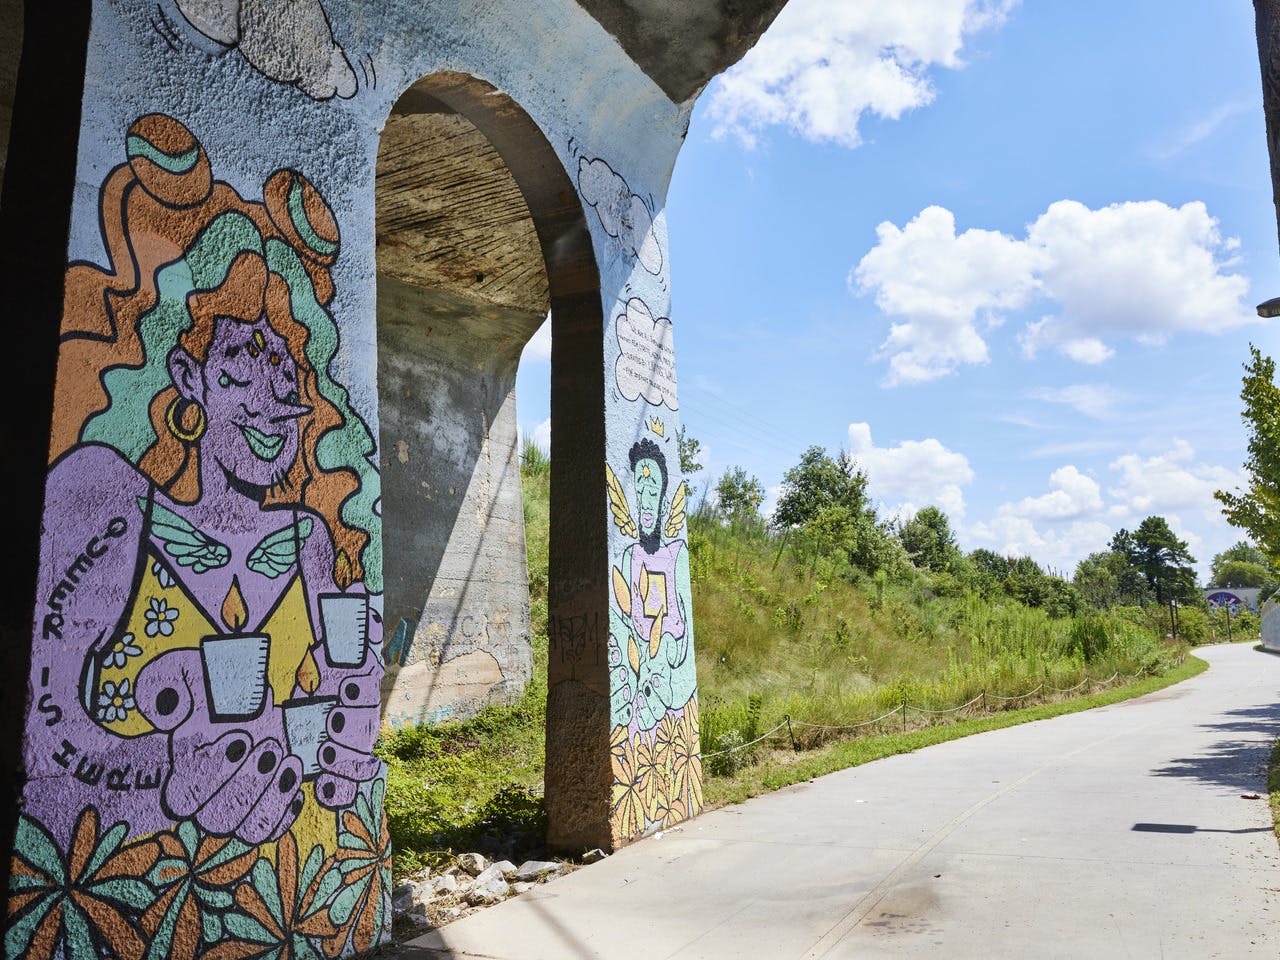 A colorful mural adorns the underside of a bride along a paved path.